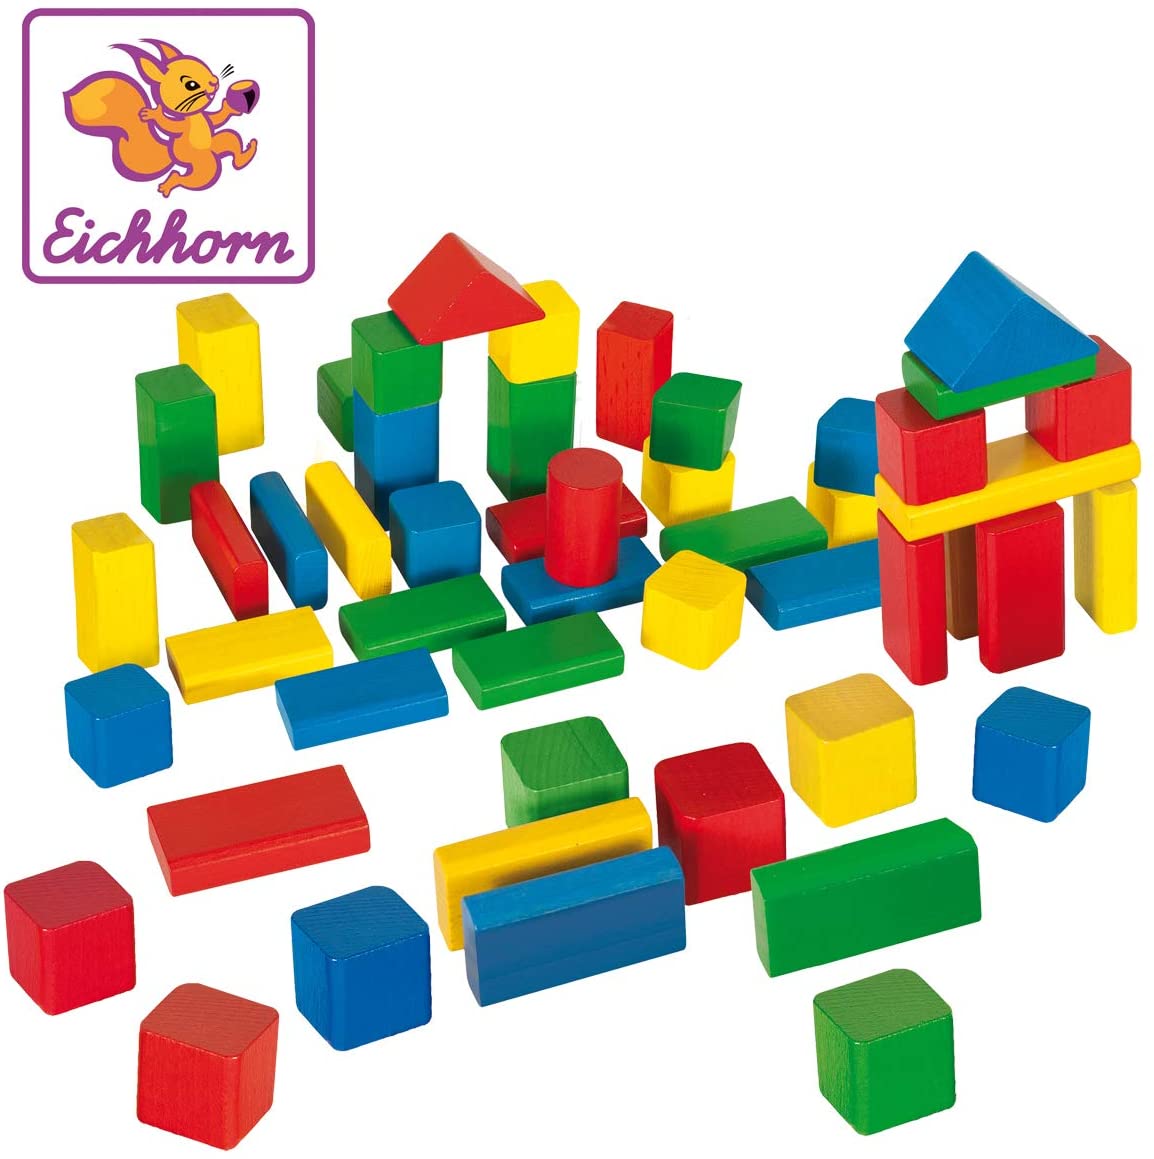 Eichhorn Colourful Wooden Building Blocks In One Shape, 25 Mm